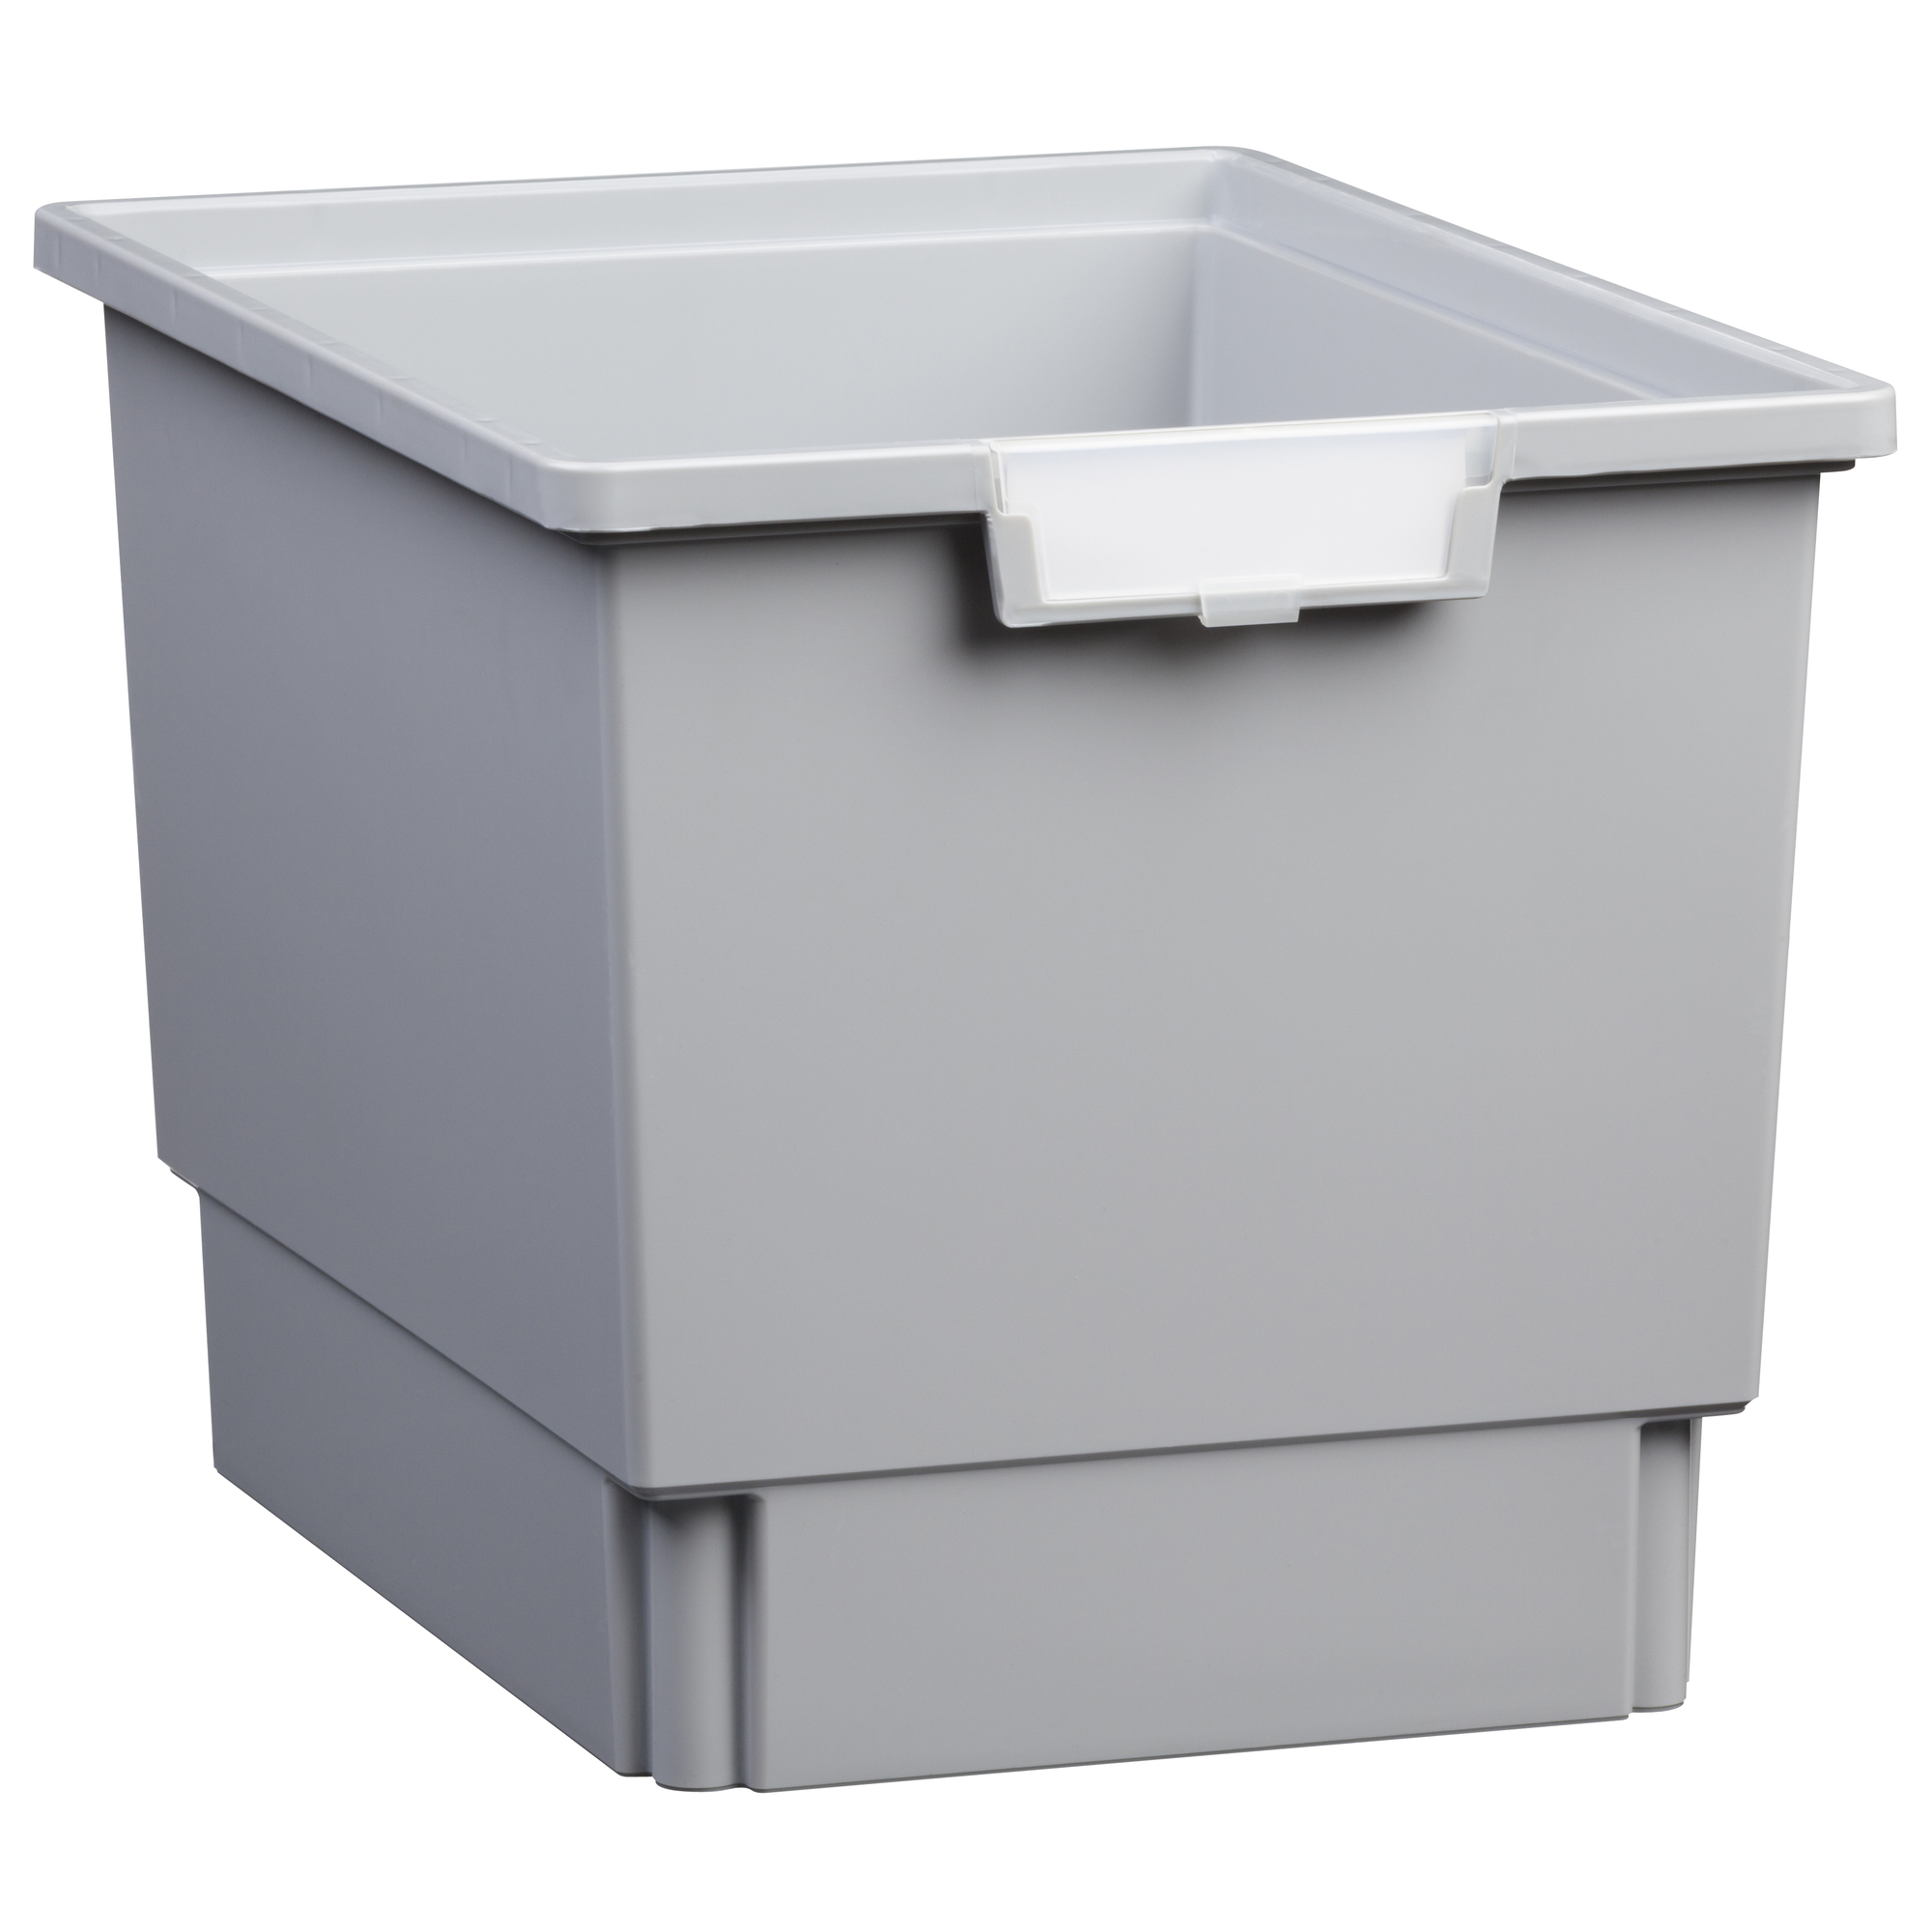 Certwood StorWerks, Slim Line 12Inch Tray in Light Gray-1PK, Included (qty.) 1 Height 12 in, Model CE1954LG1